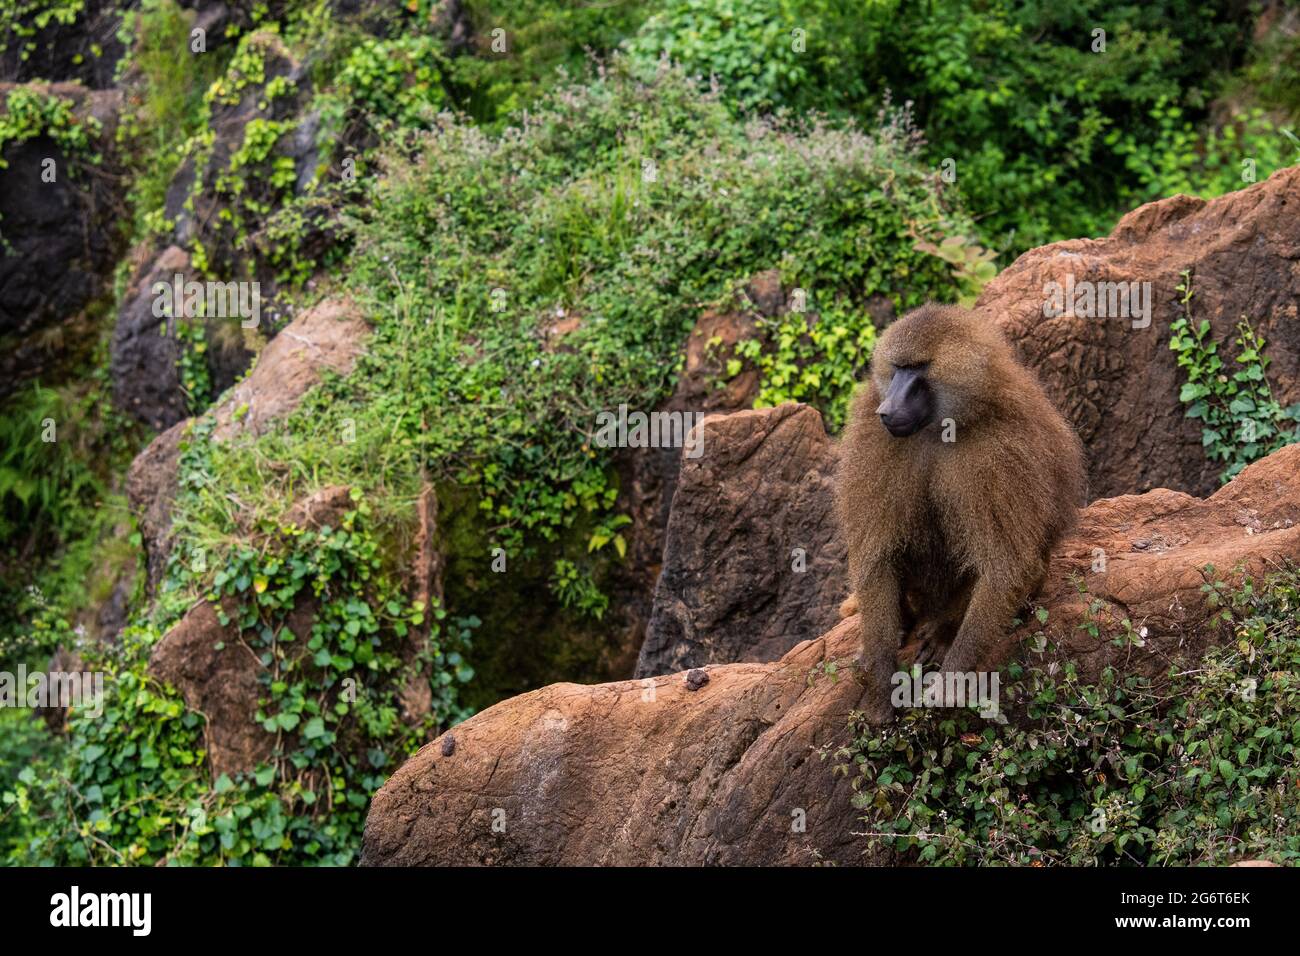 A Guinea baboon (Papio papio) in Cabarceno Nature Park. The Cabarceno Nature Park is not a conventional zoo. It is an area of 750 hectares that houses Stock Photo